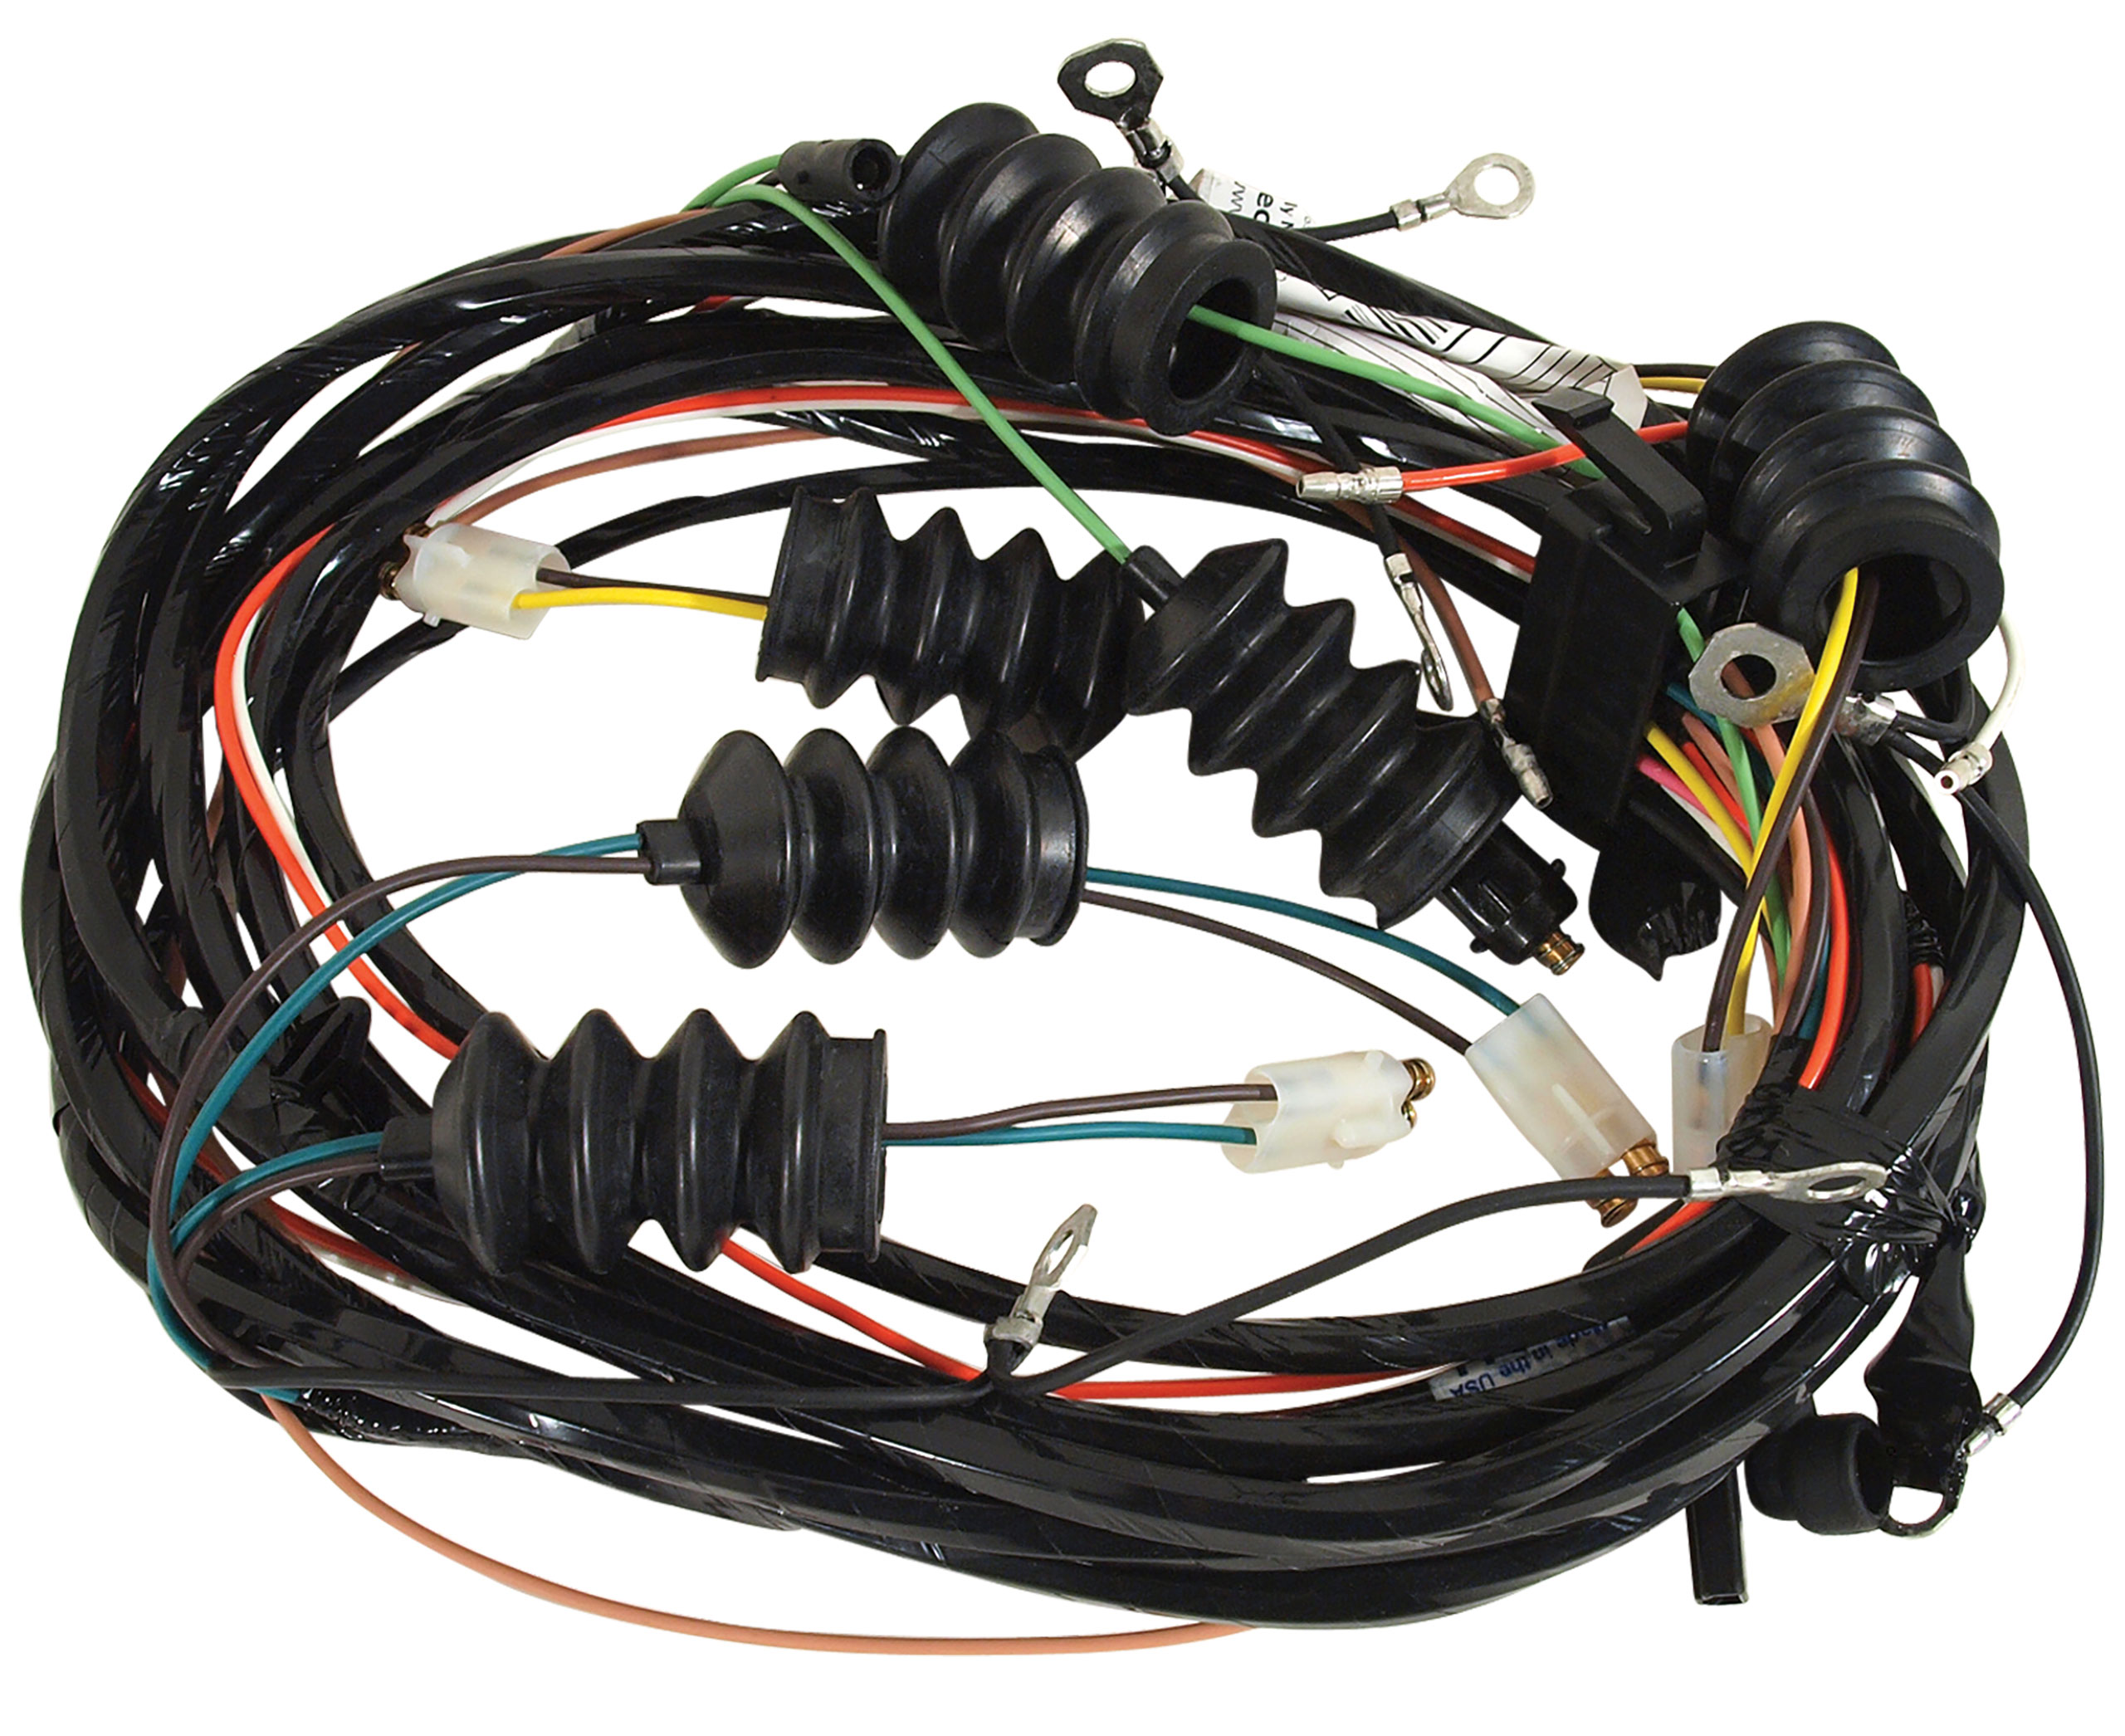 C2 1967 Chevrolet Corvette Harness. Rear All - Lectric Limited, Inc.